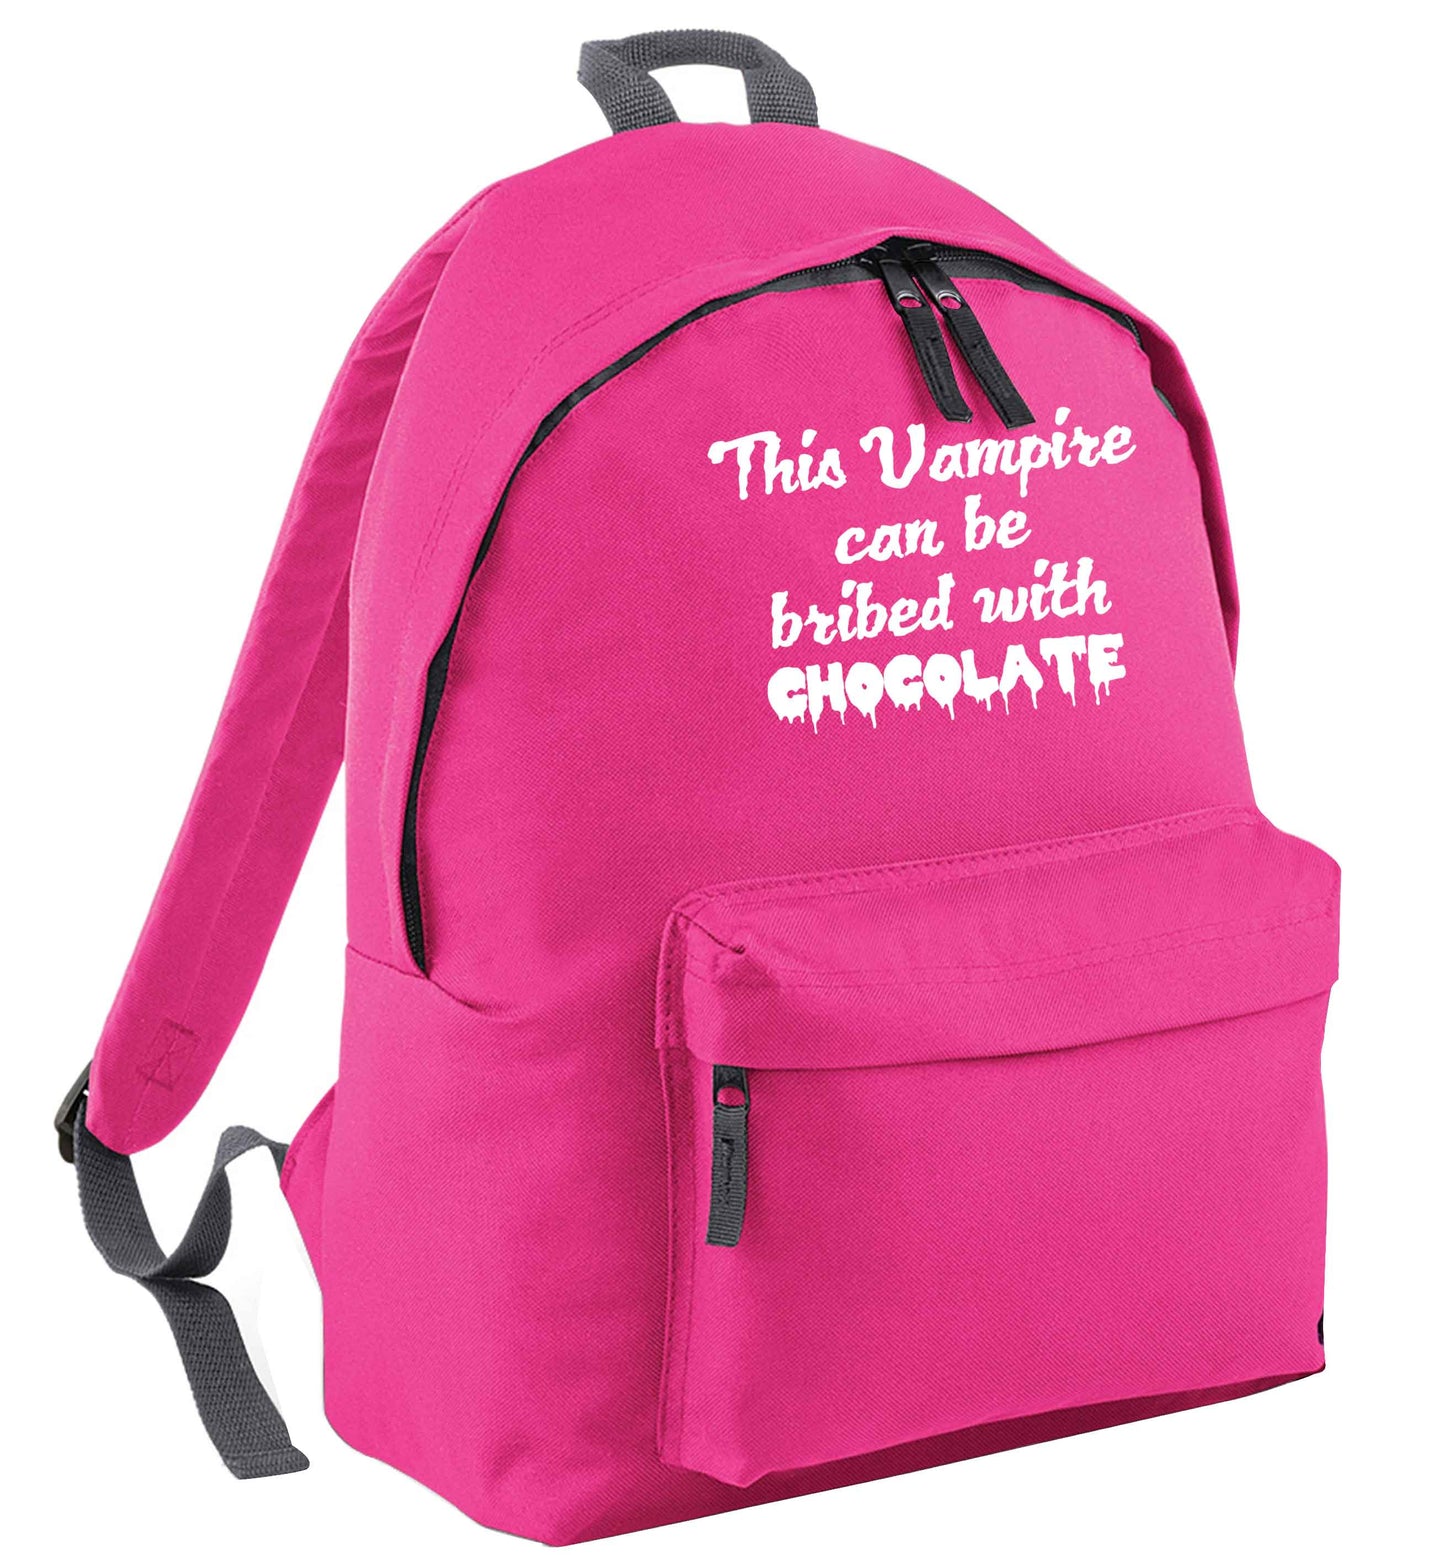 This vampire can be bribed with chocolate pink adults backpack